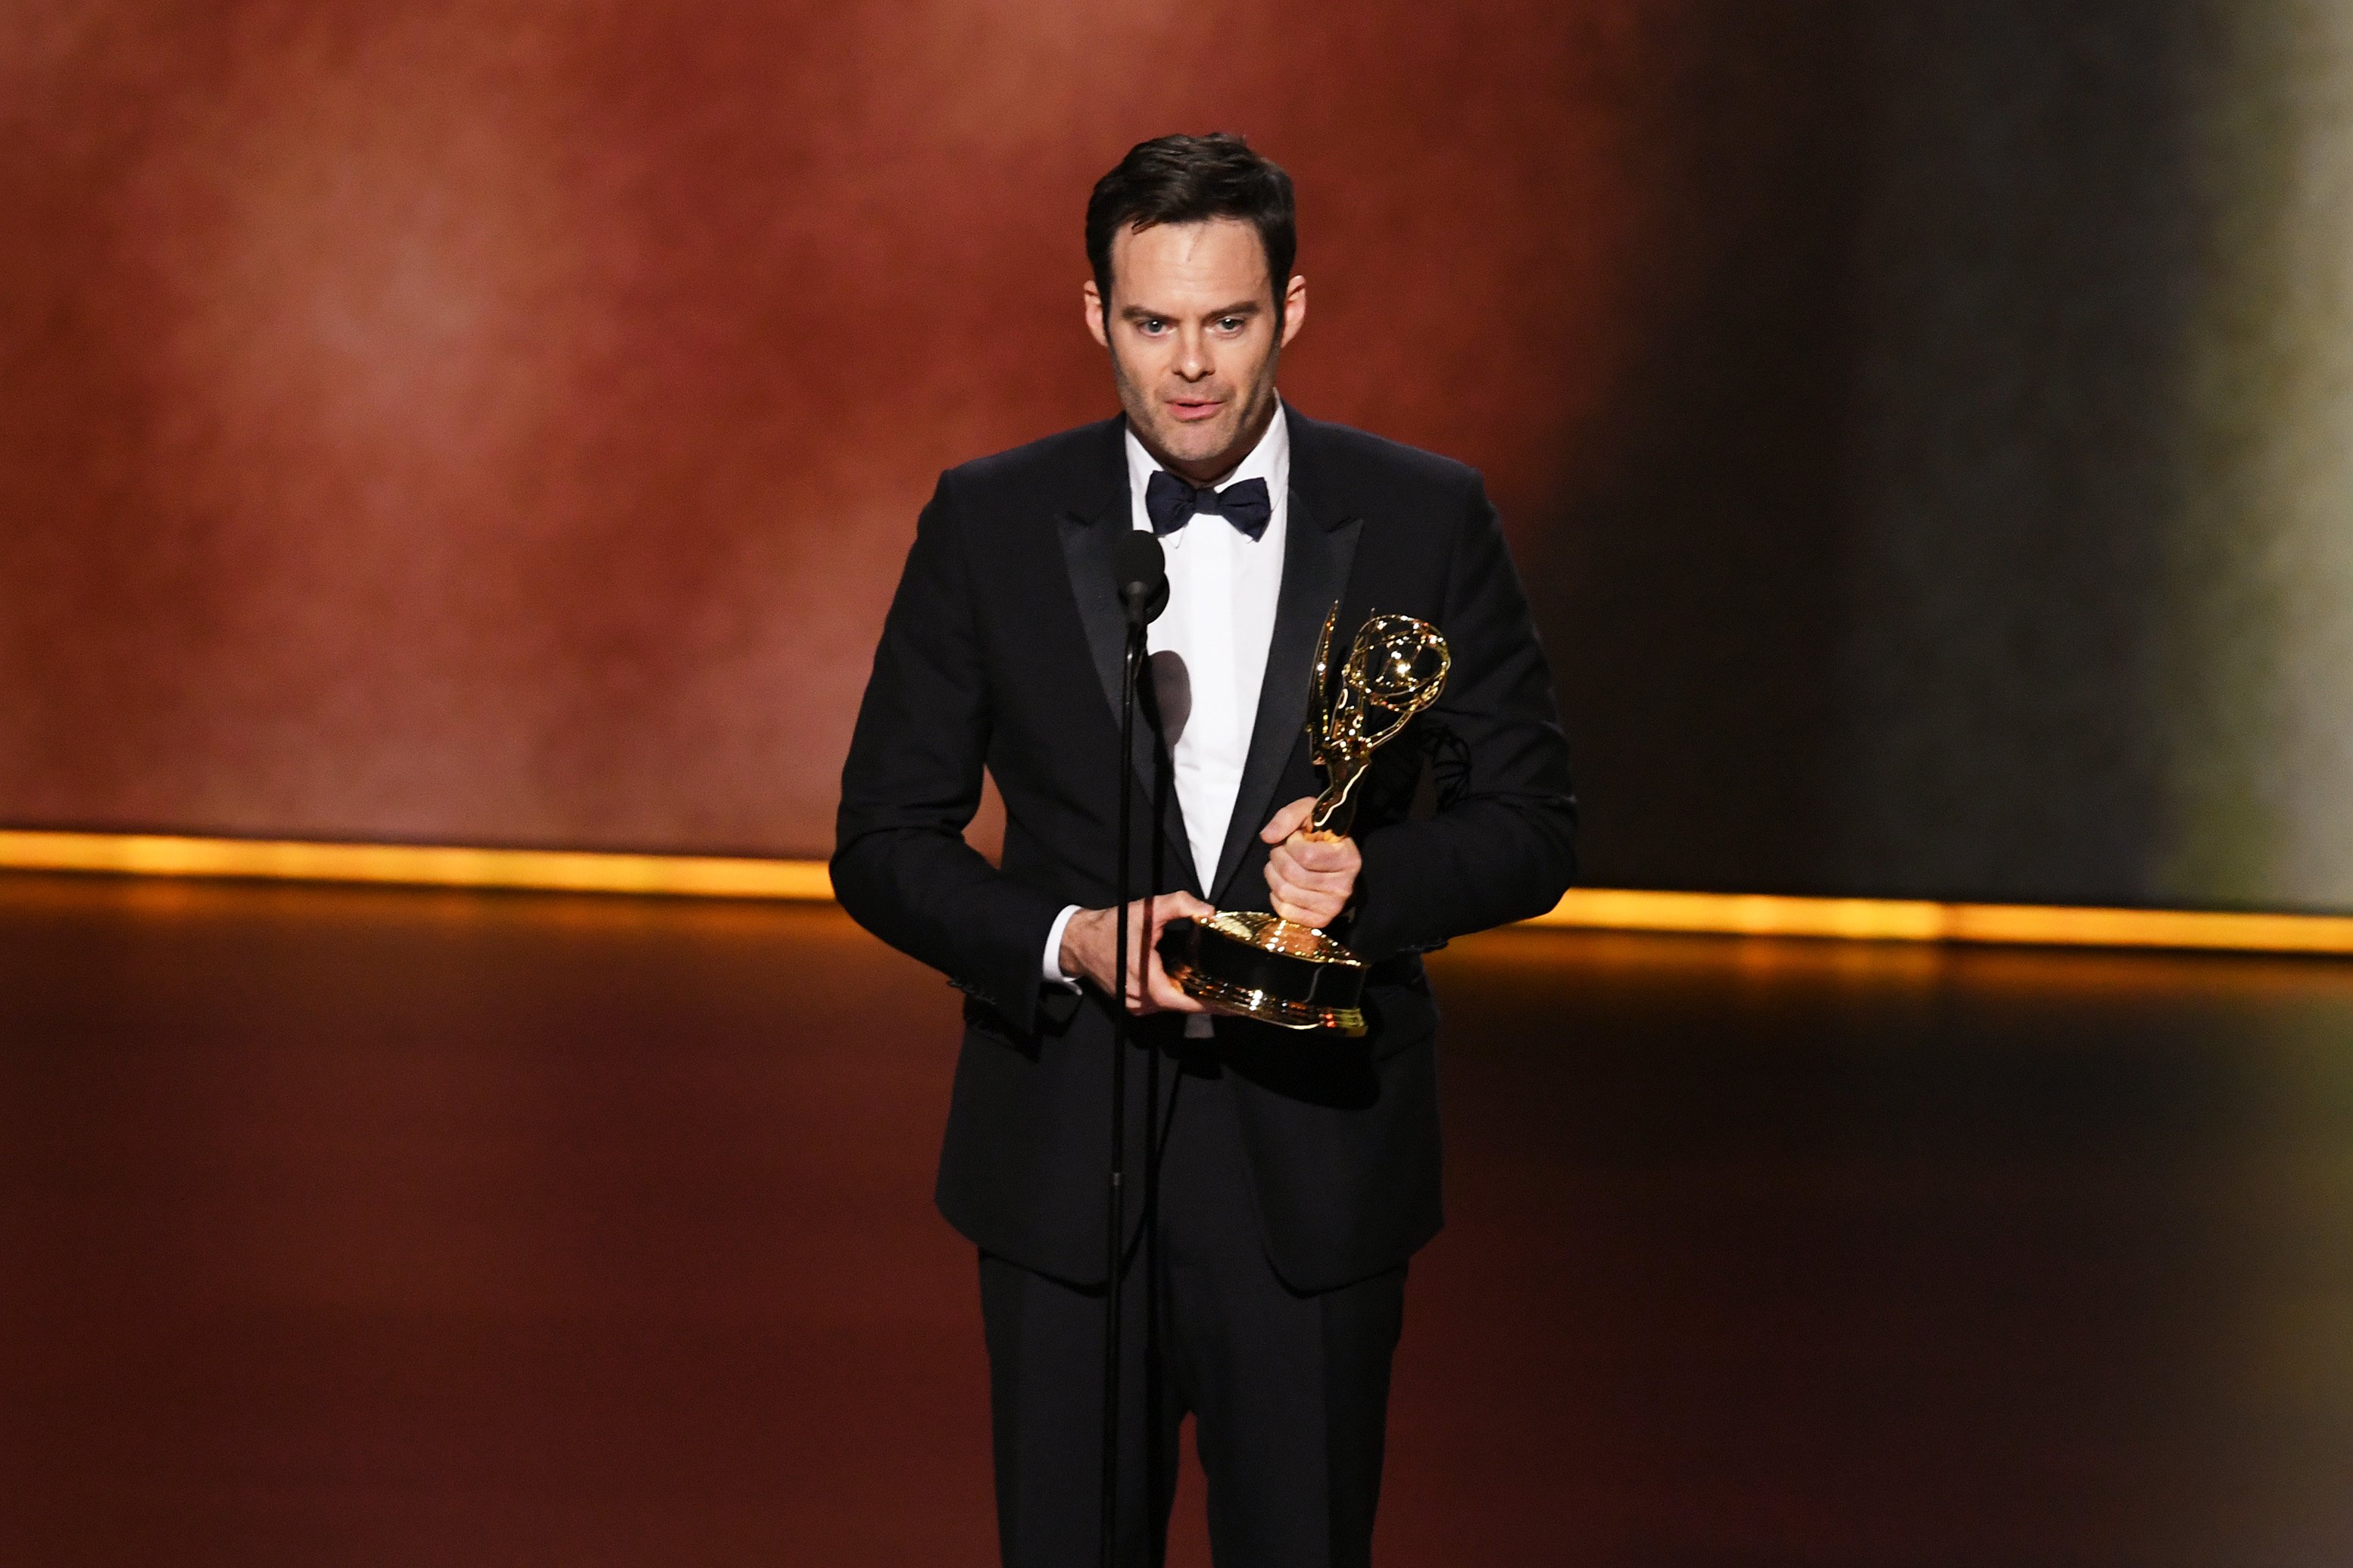 Bill Hader accepts the Outstanding Lead Actor in a Comedy Series award for 'Barry' onstage during the 71st Emmy Awards at Microsoft Theater on September 22, 2019 in Los Angeles, California. | Source: Getty Images